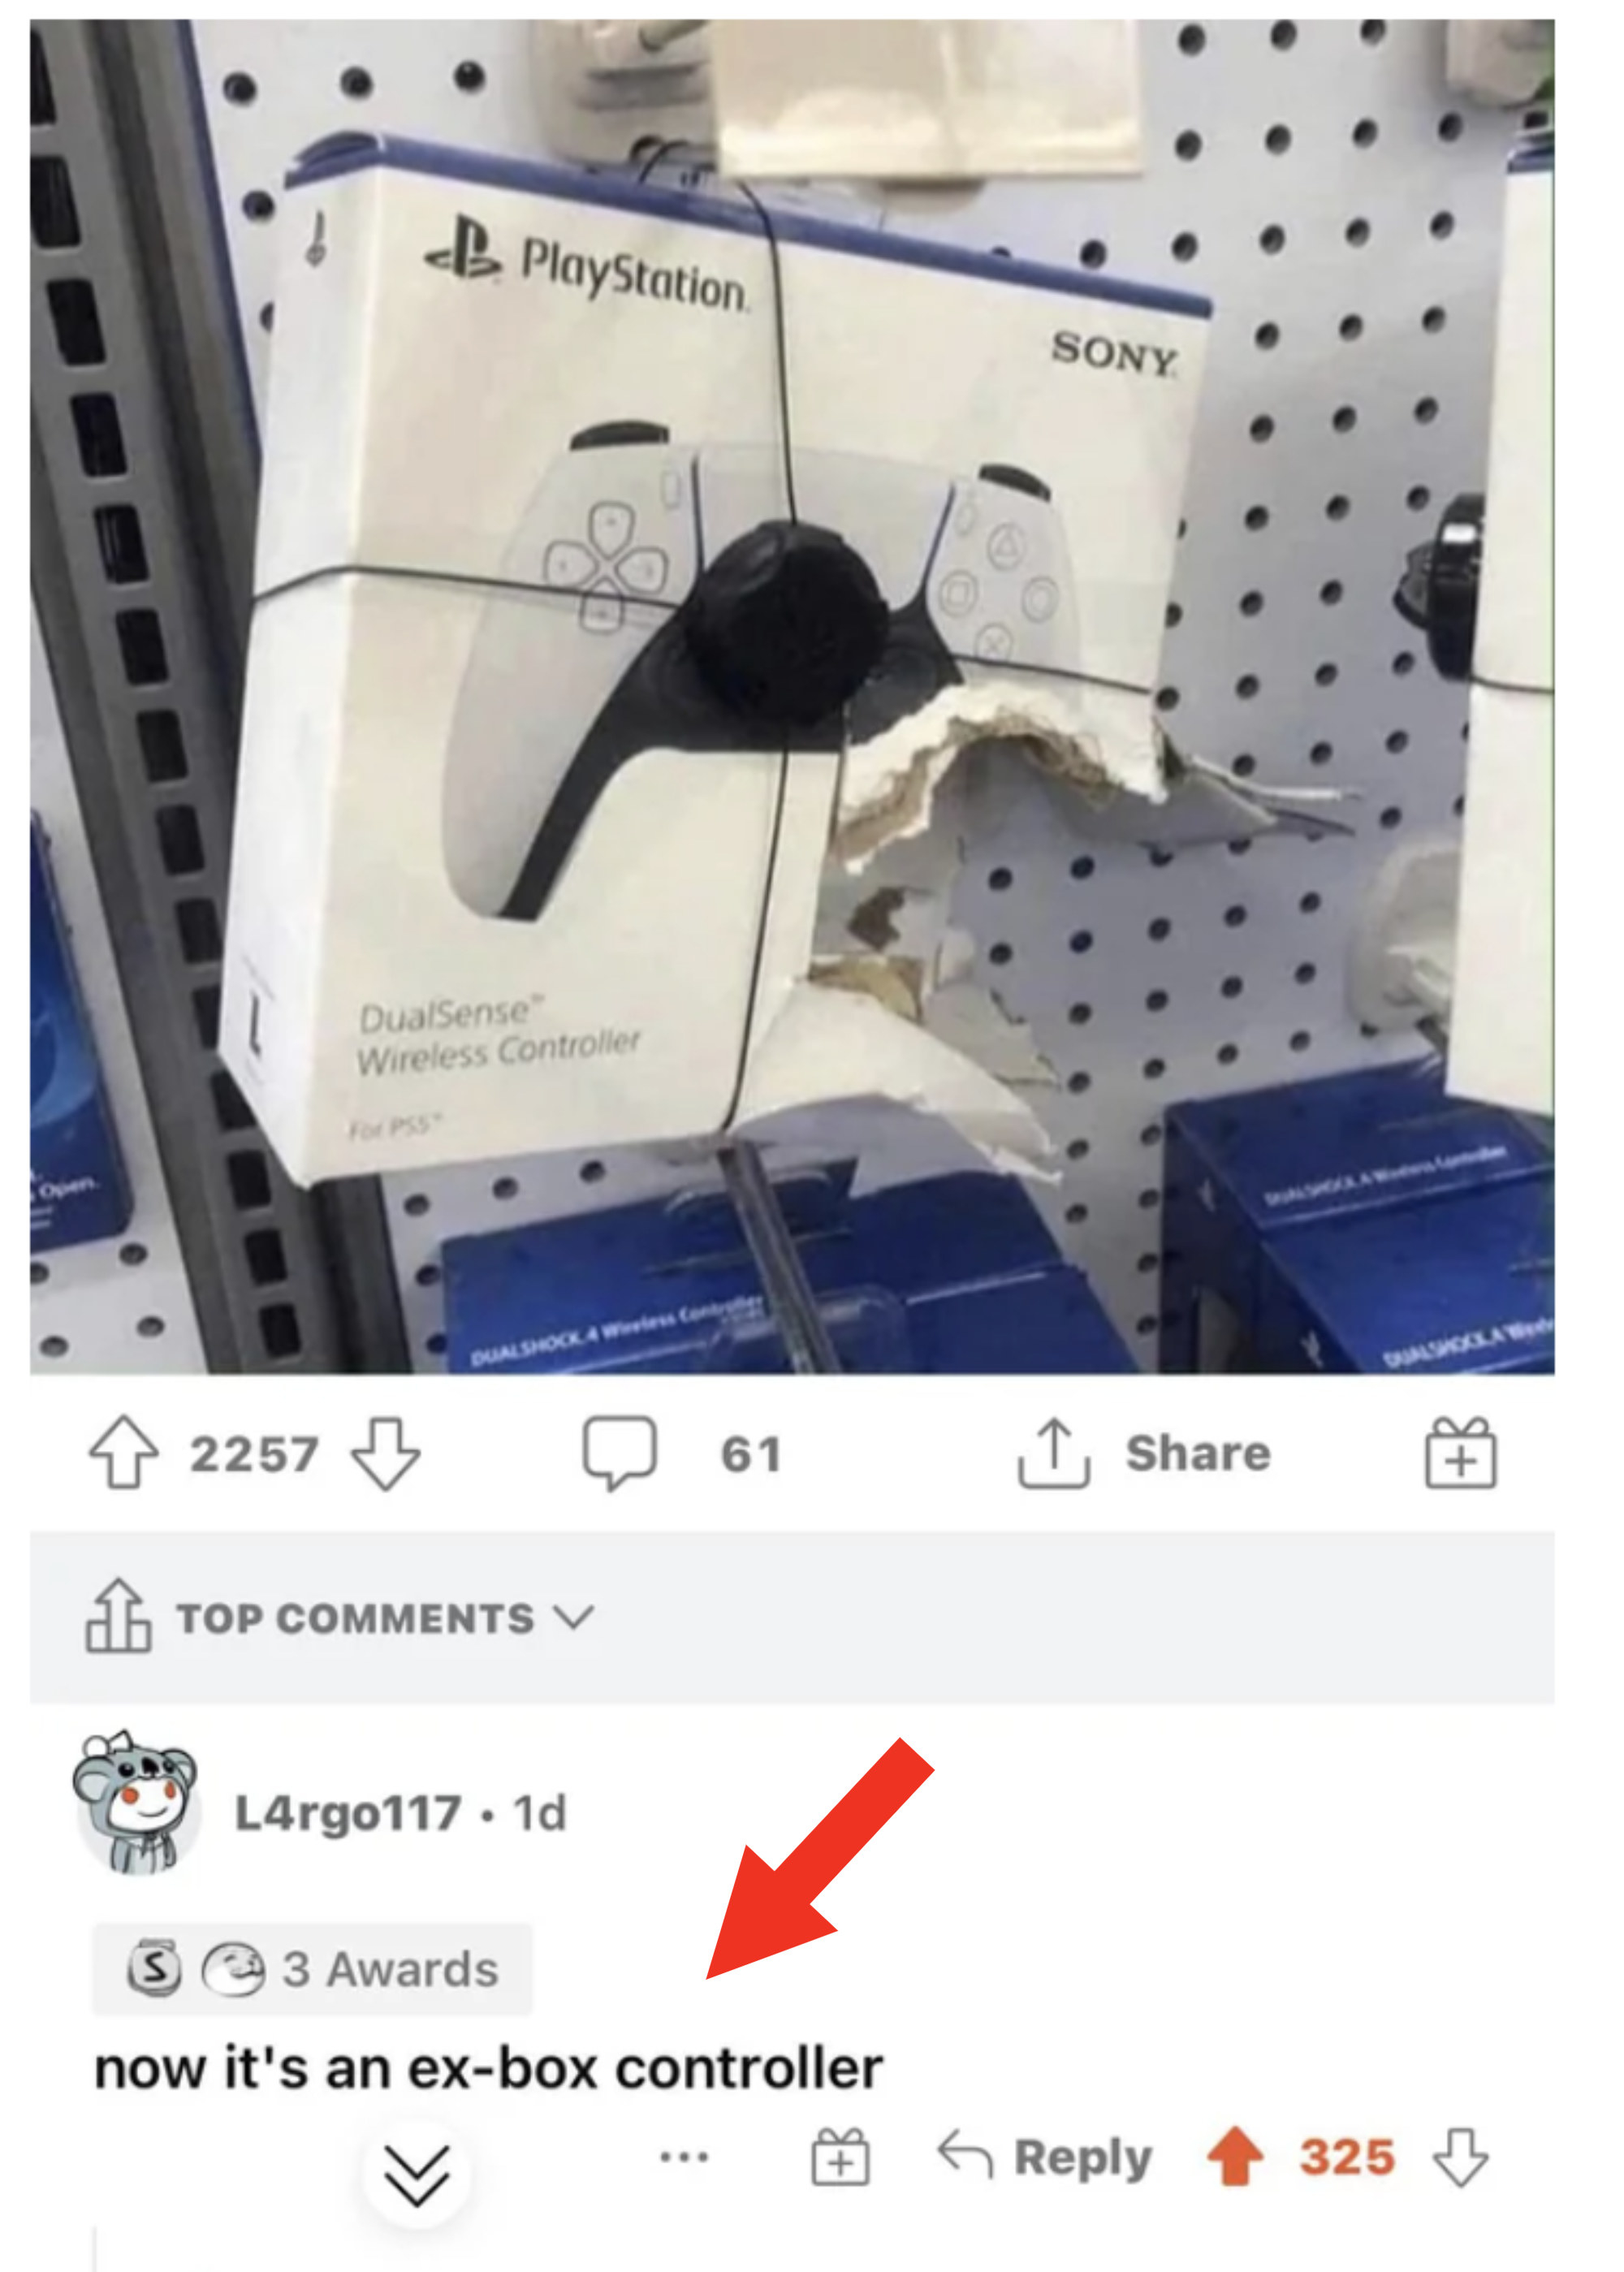 A photo of a PlayStation 5 controller box shows someone ripped the box open and stole the controller; the commenter says "now it's an ex-box controller"